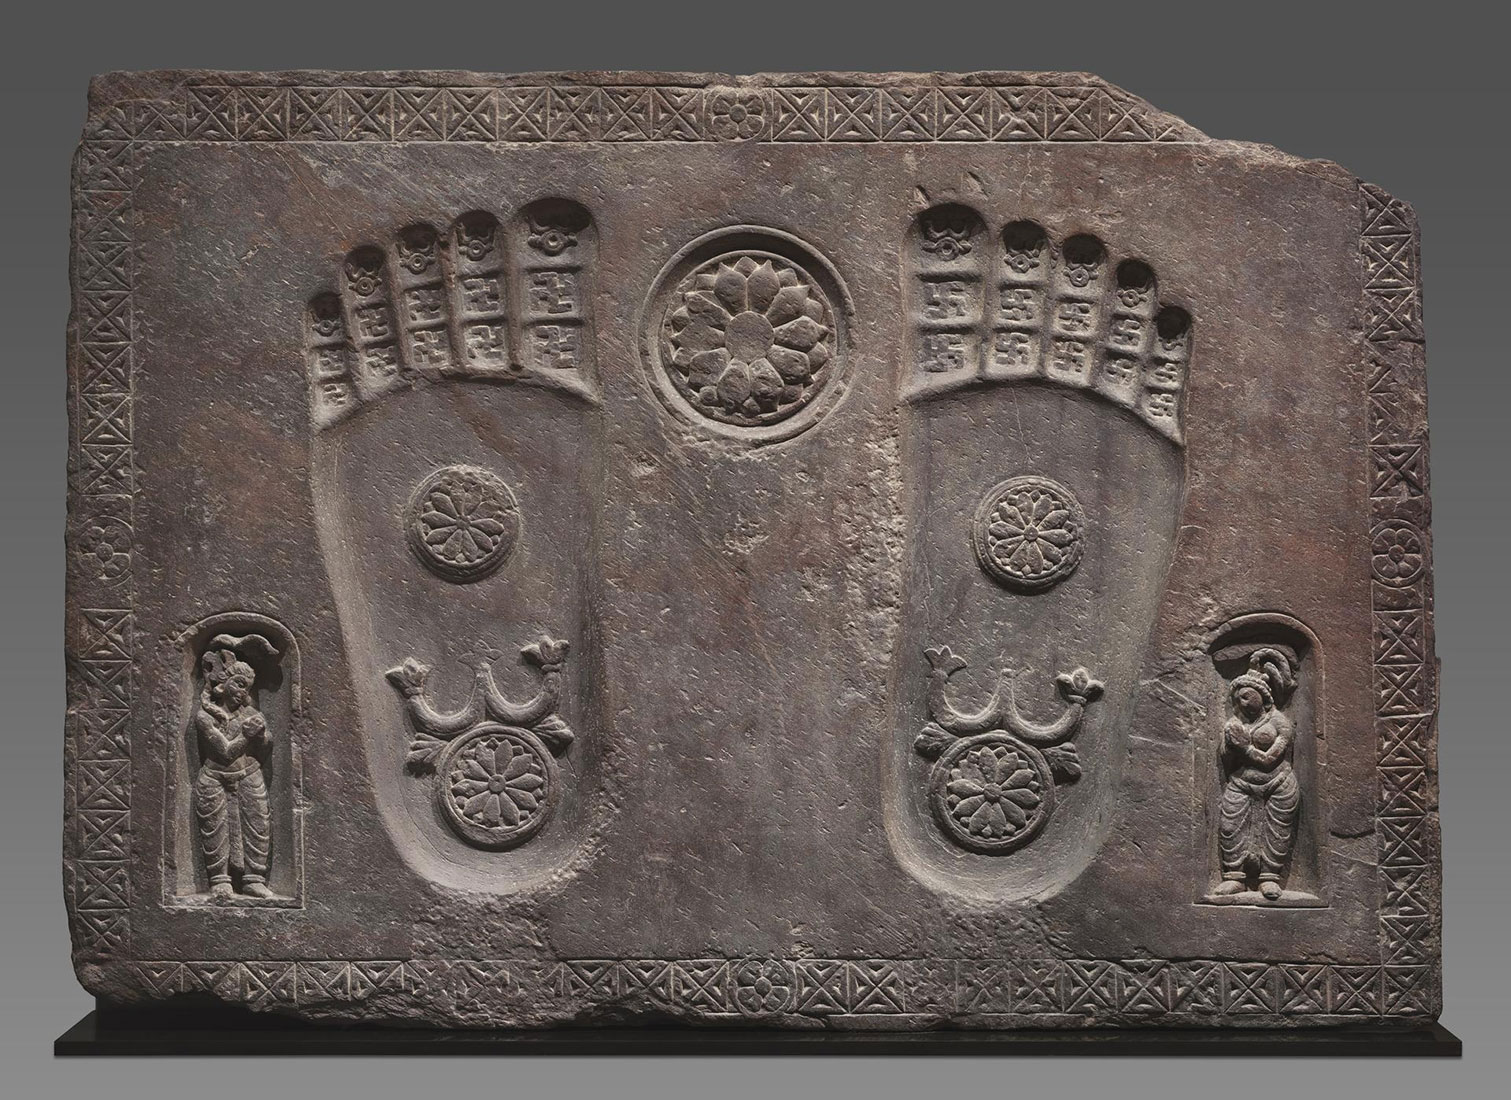 Footprints of the Buddha from the Yale University Art Gallery